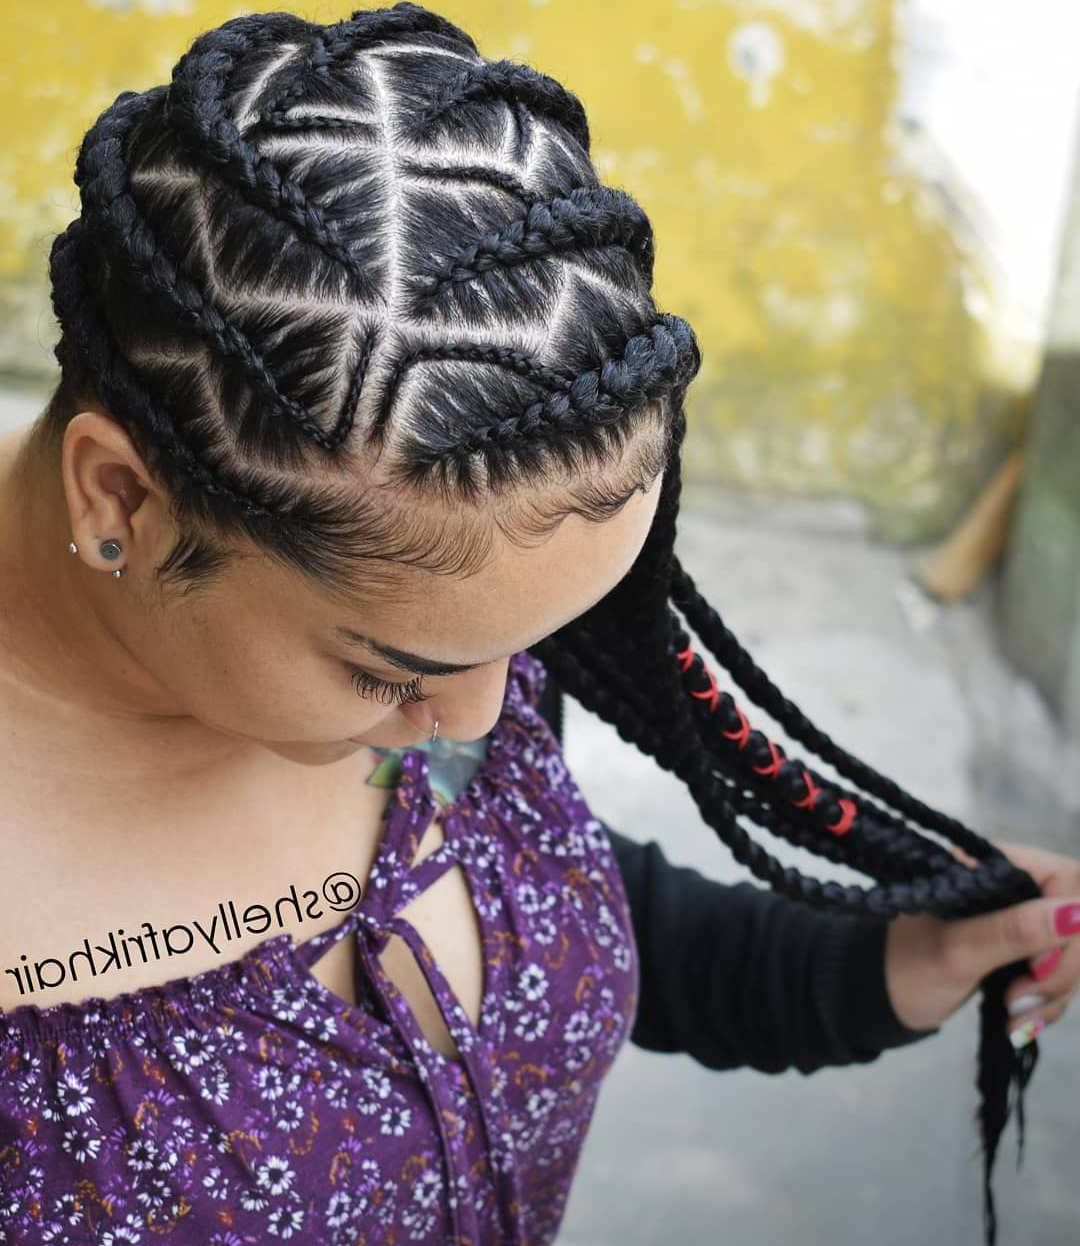 20 Head Turning Lemonade Braid Styles For All Ages Within Current Long And Big Cornrows Under Braid Hairstyles (View 16 of 20)